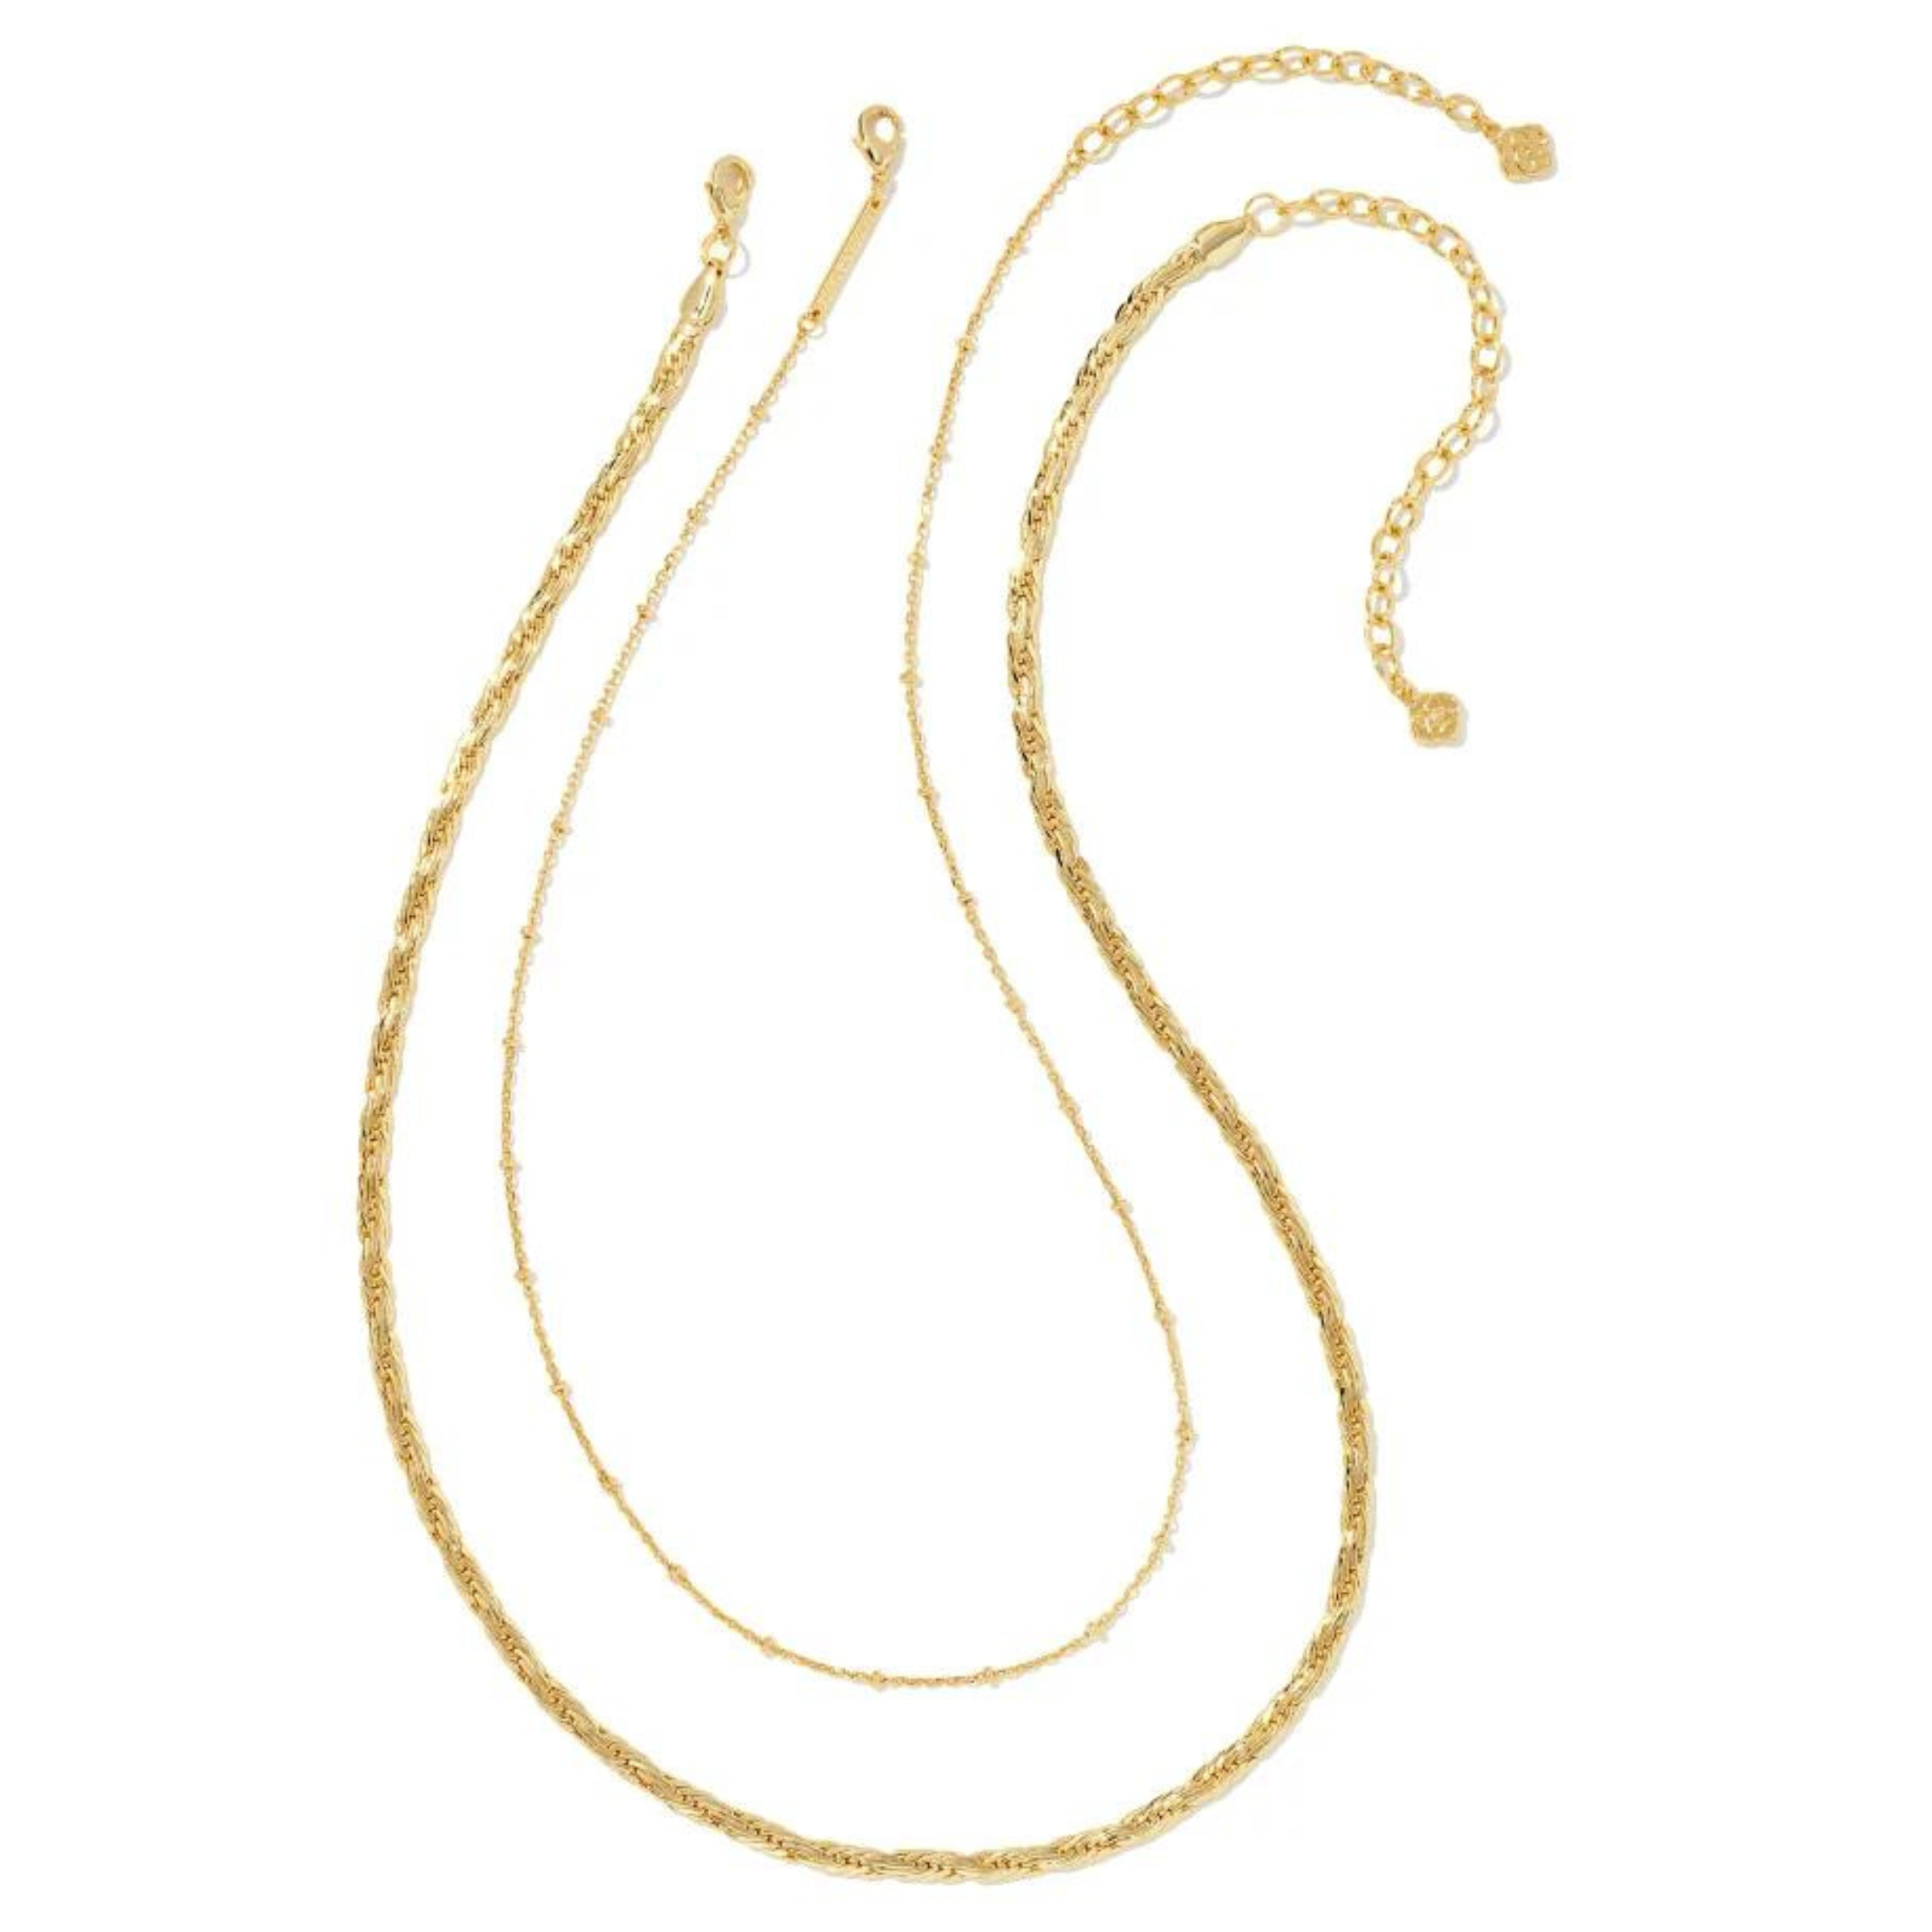 Two gold chain necklaces pictured on a white background. 